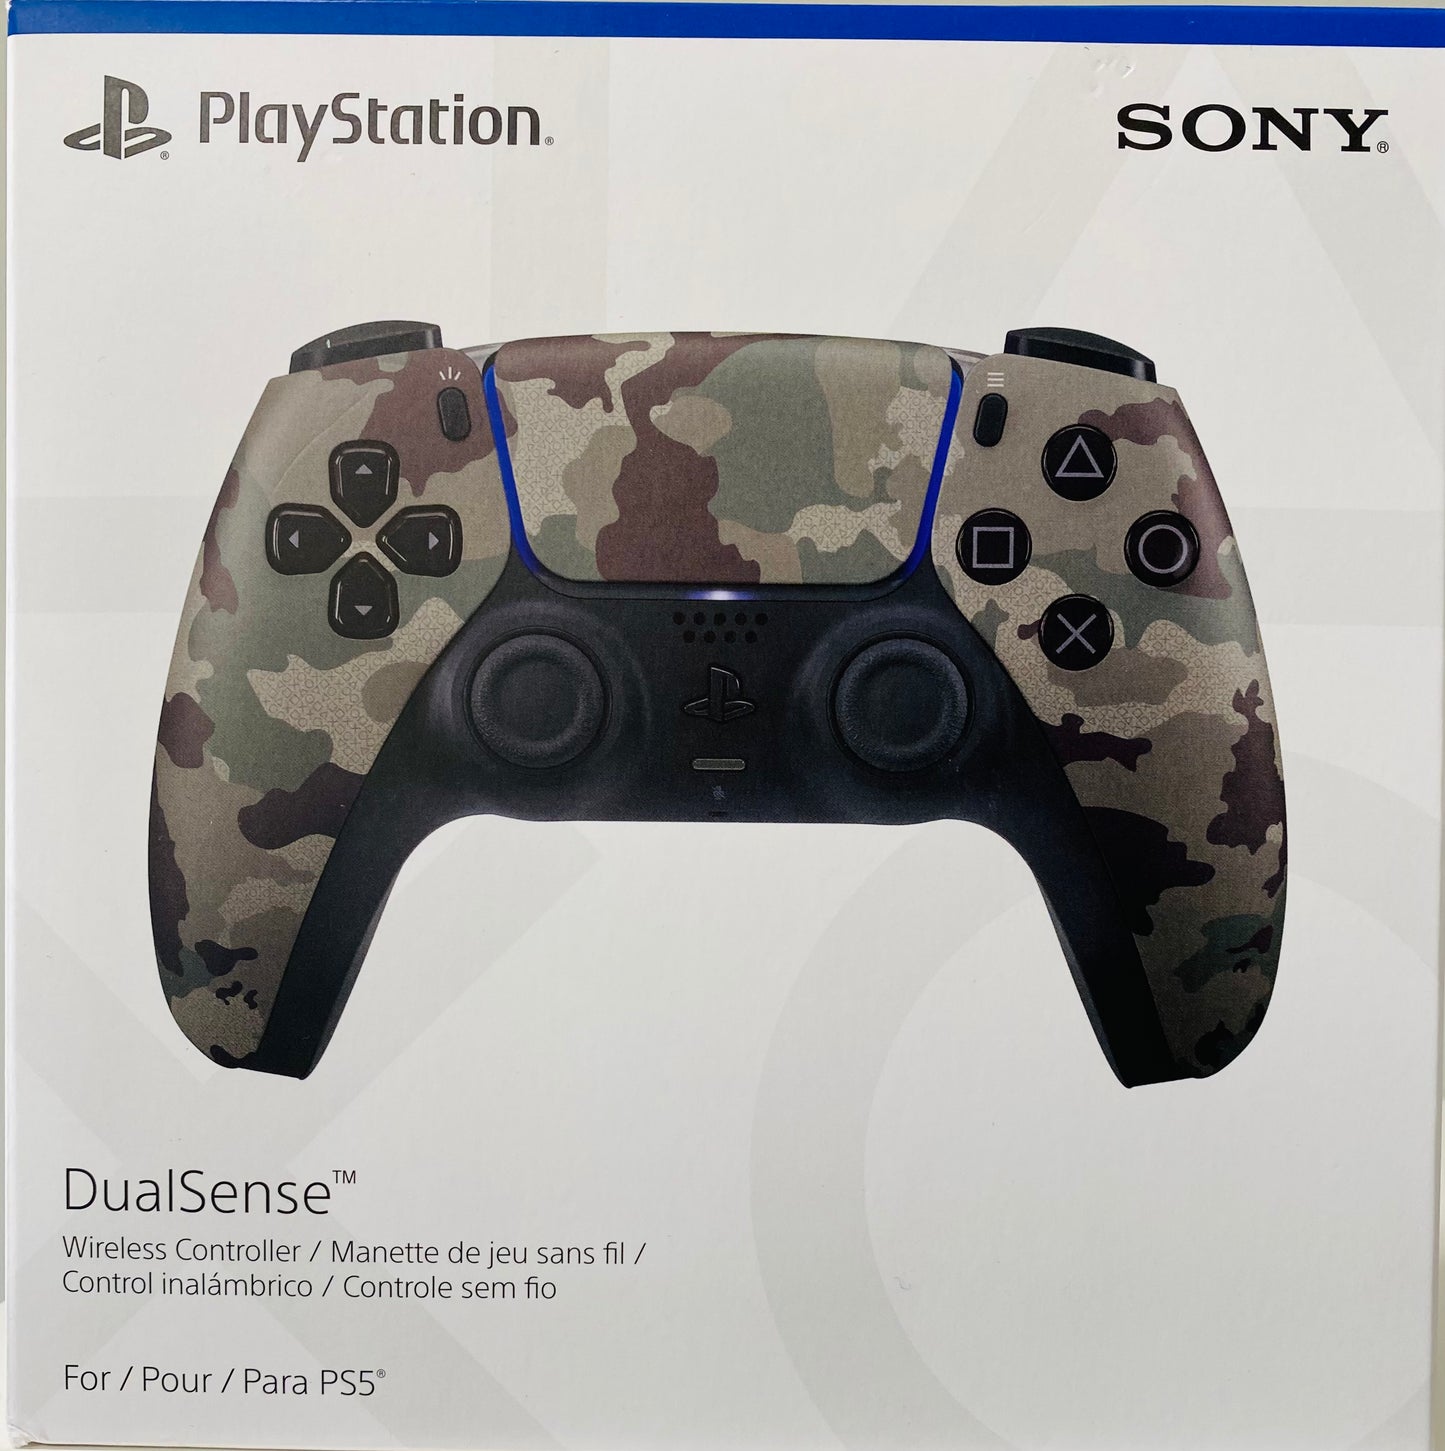 SONY PlayStation 5 DualSense Wireless Controller PS5 - Gray Camouflage (Brand New in Sealed Box)